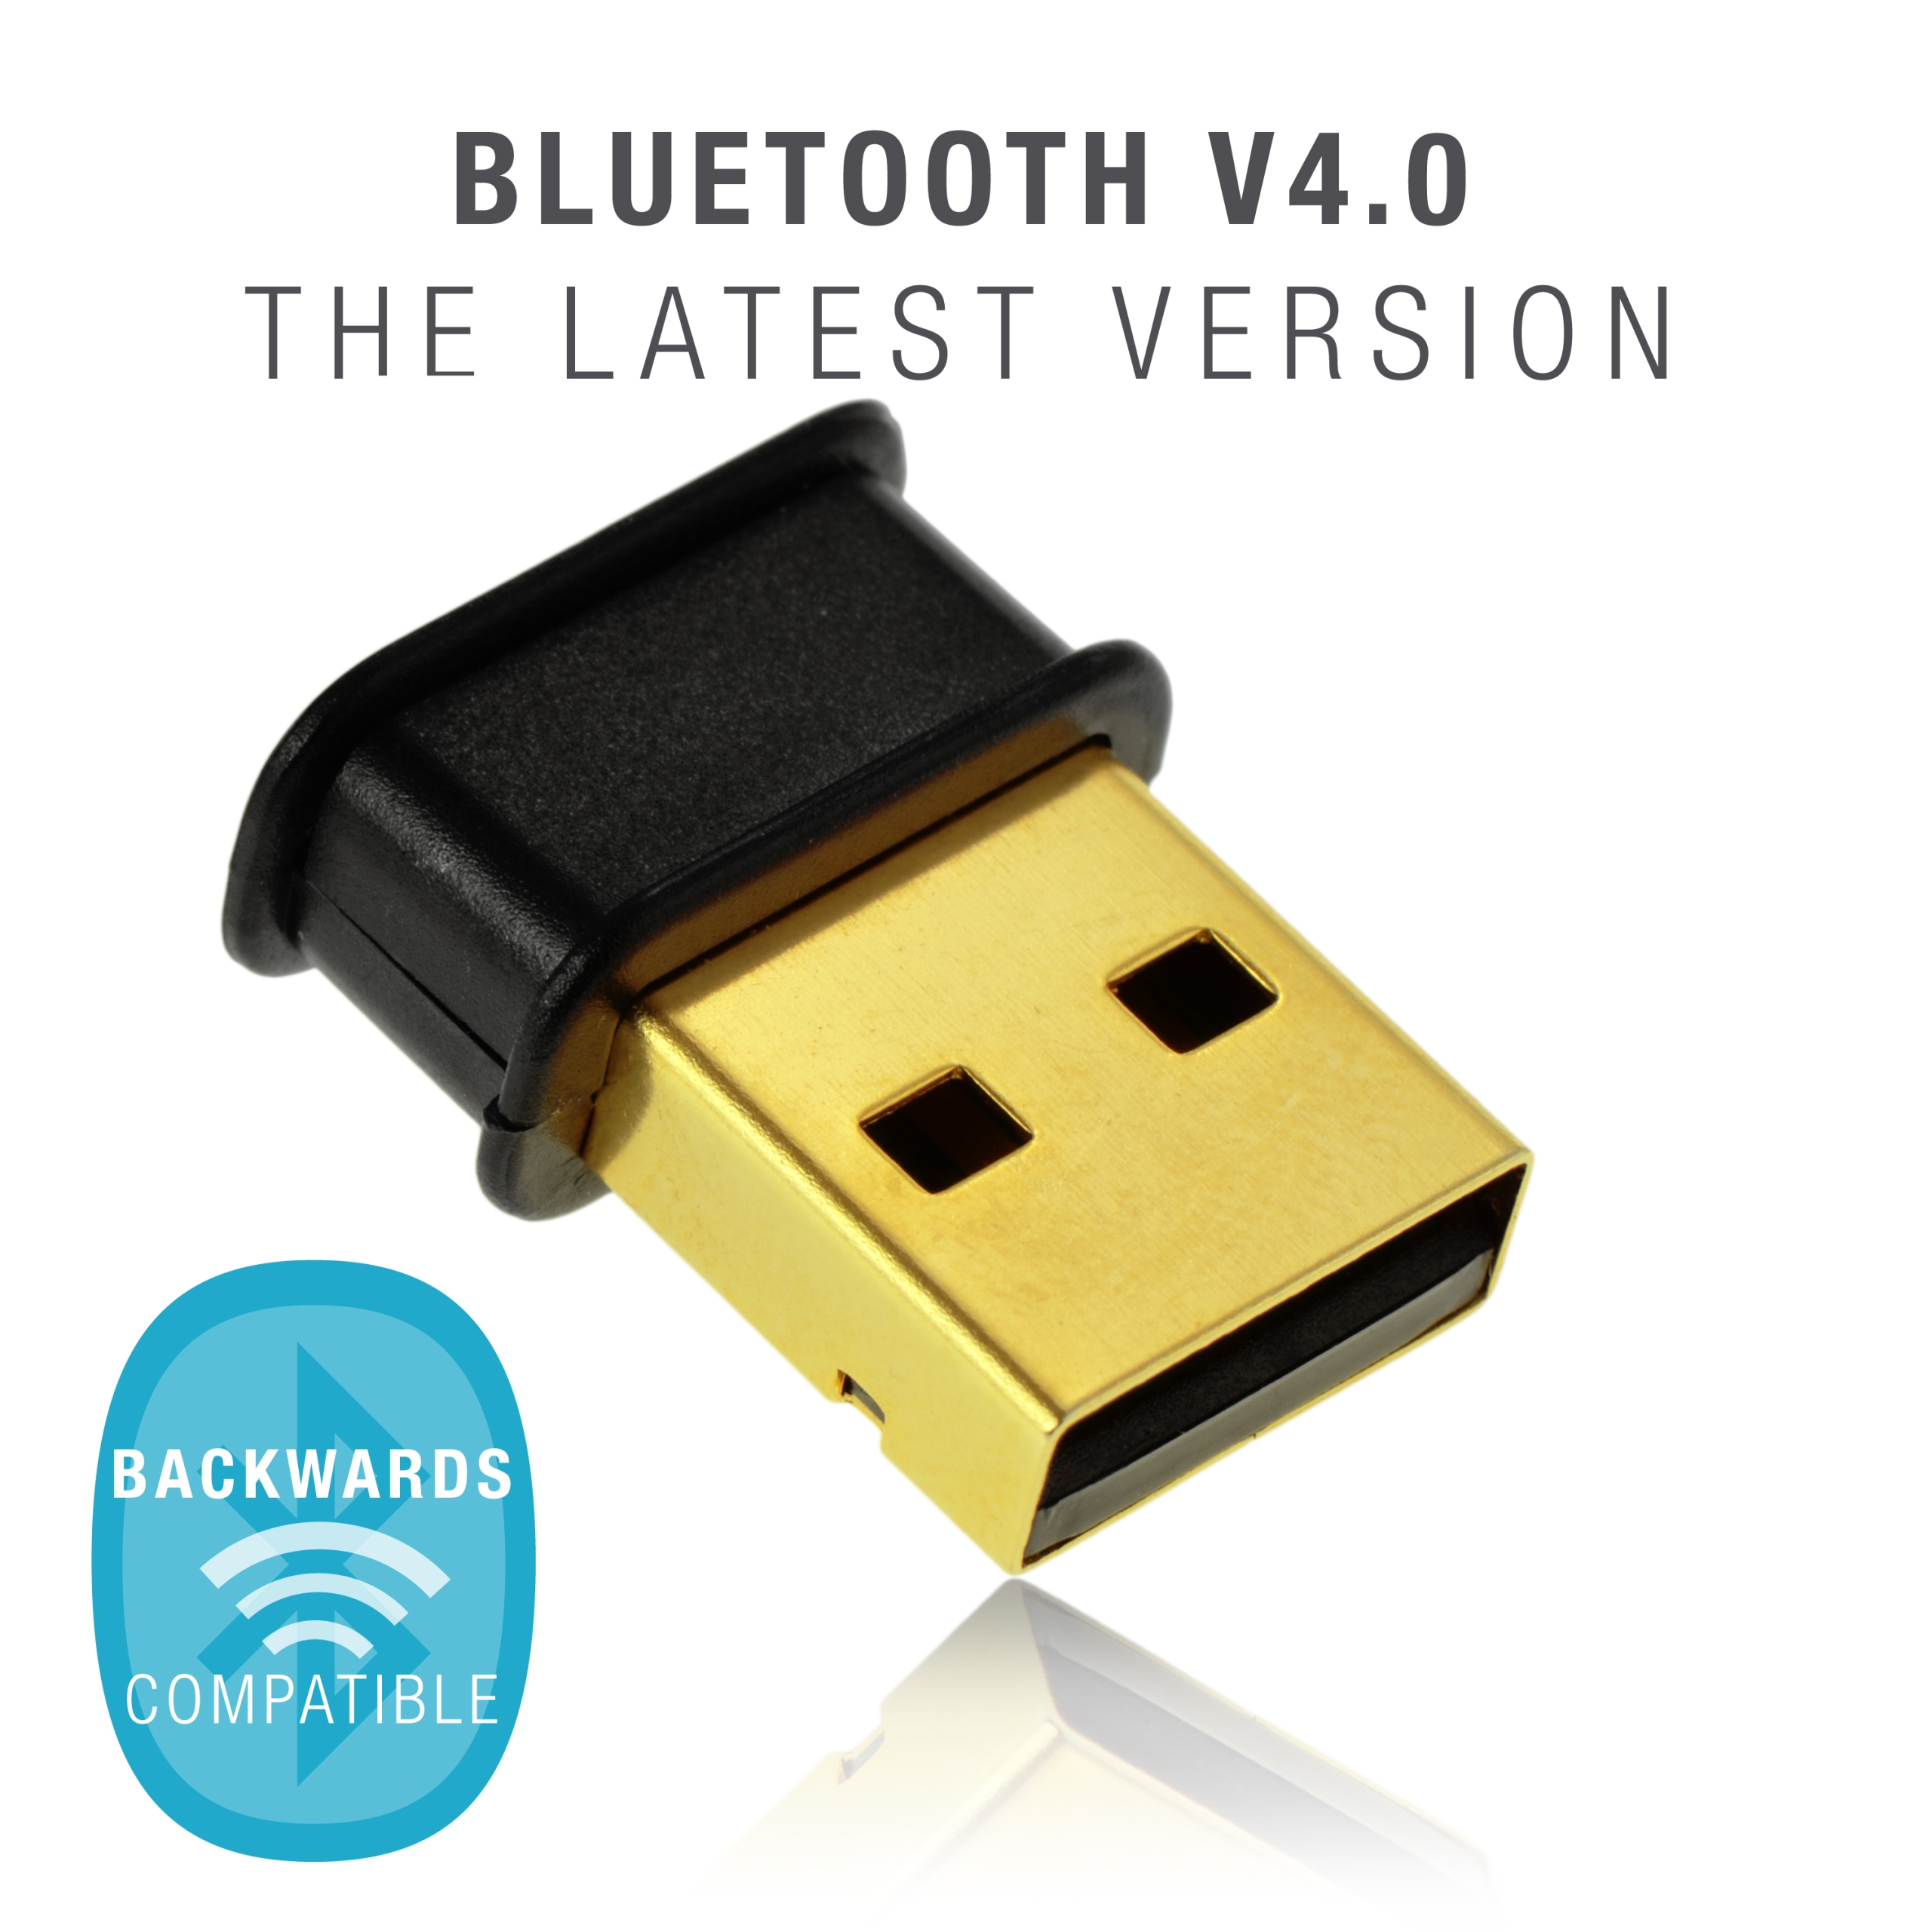 Medialink Bluetooth 4.0 USB Adapter - Low Energy Technology